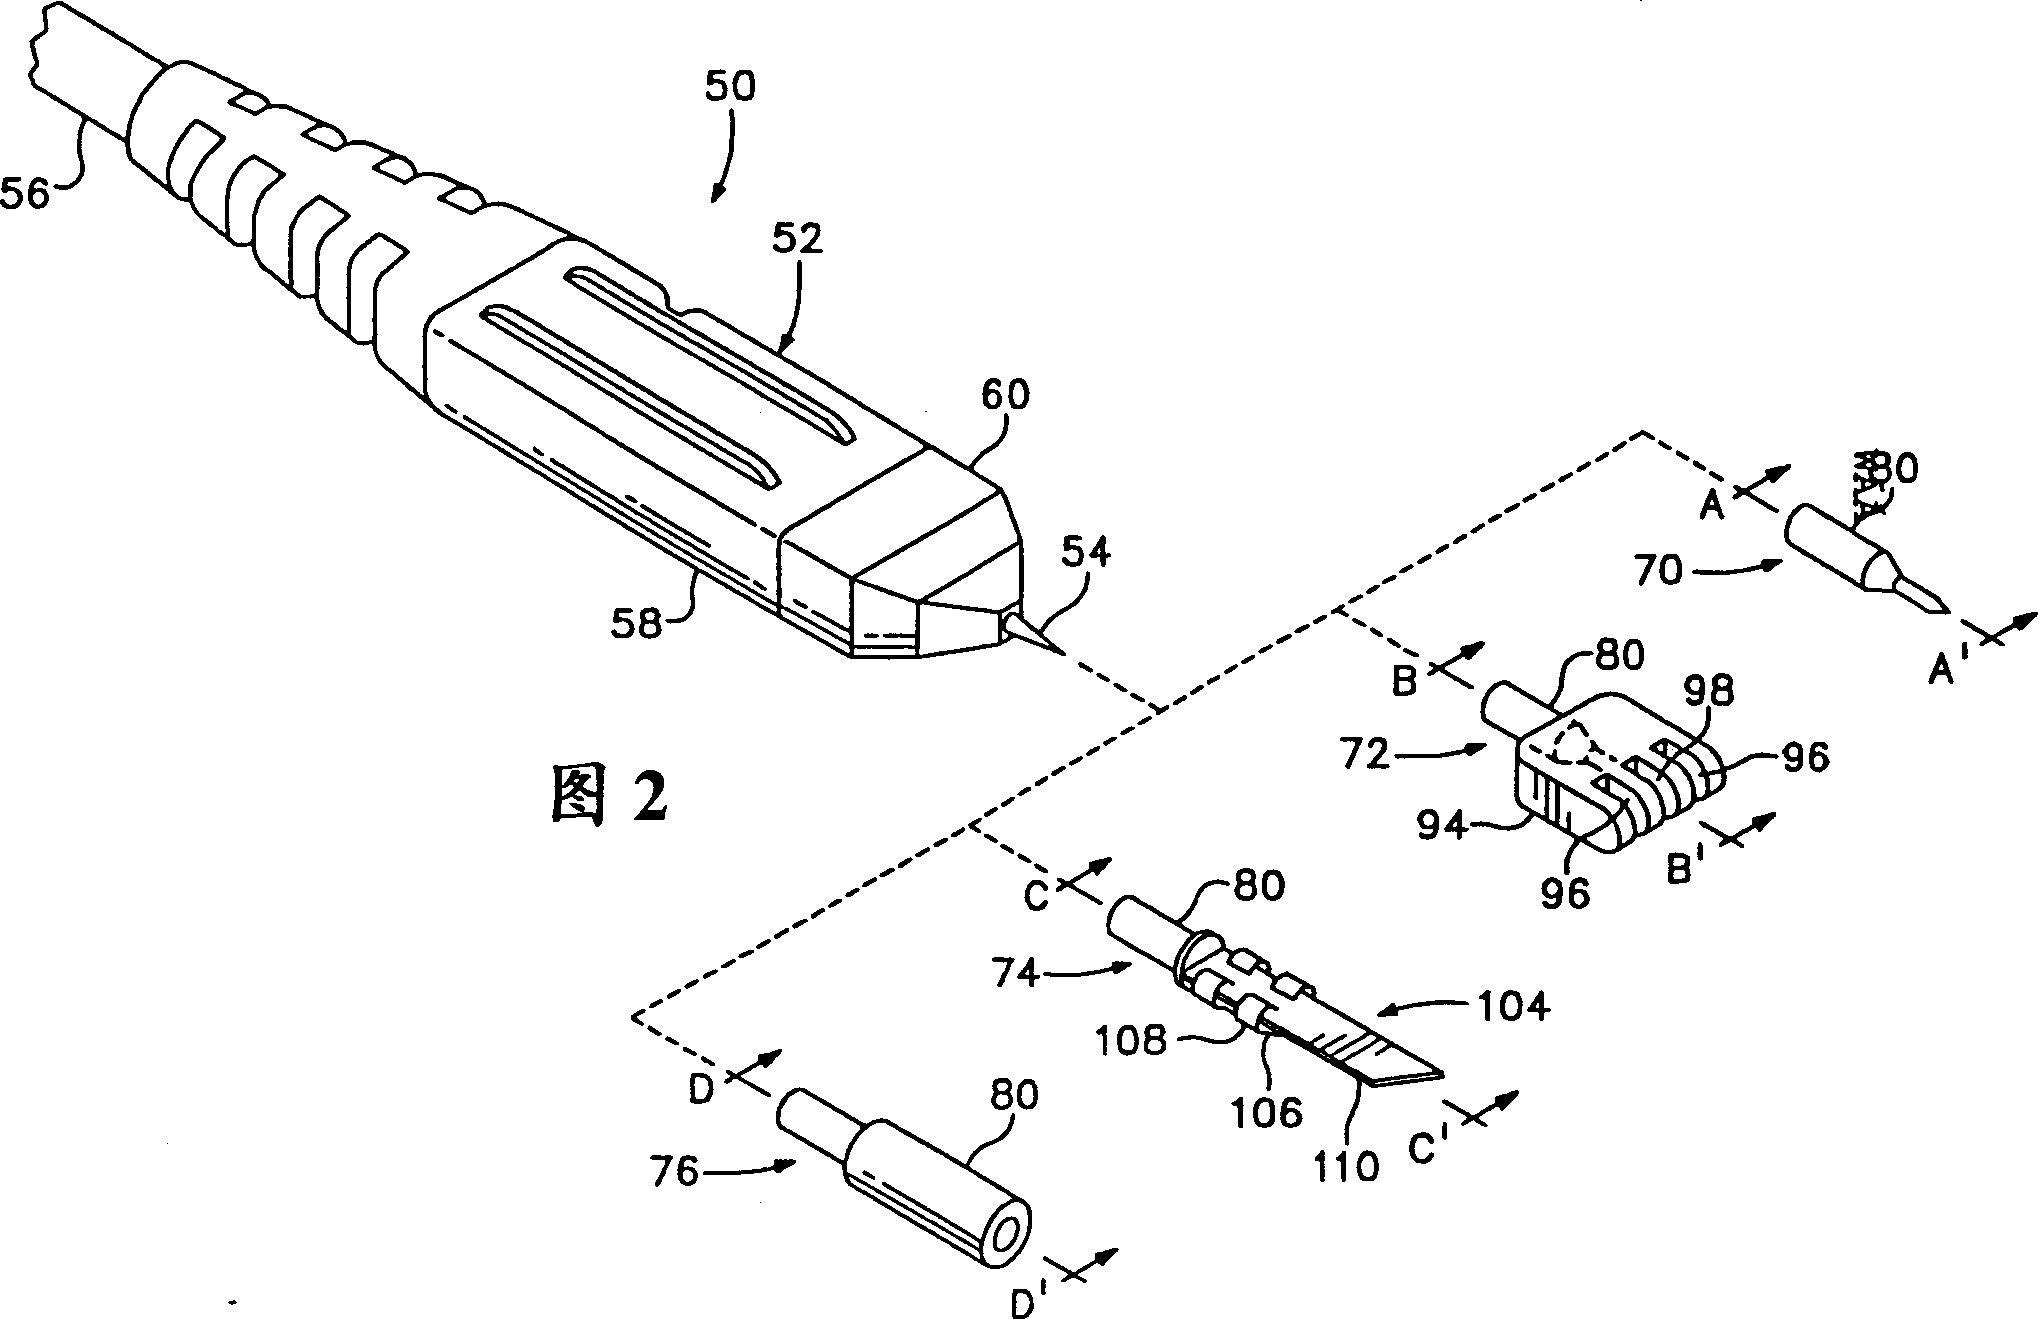 Probe head adapter for checking probe